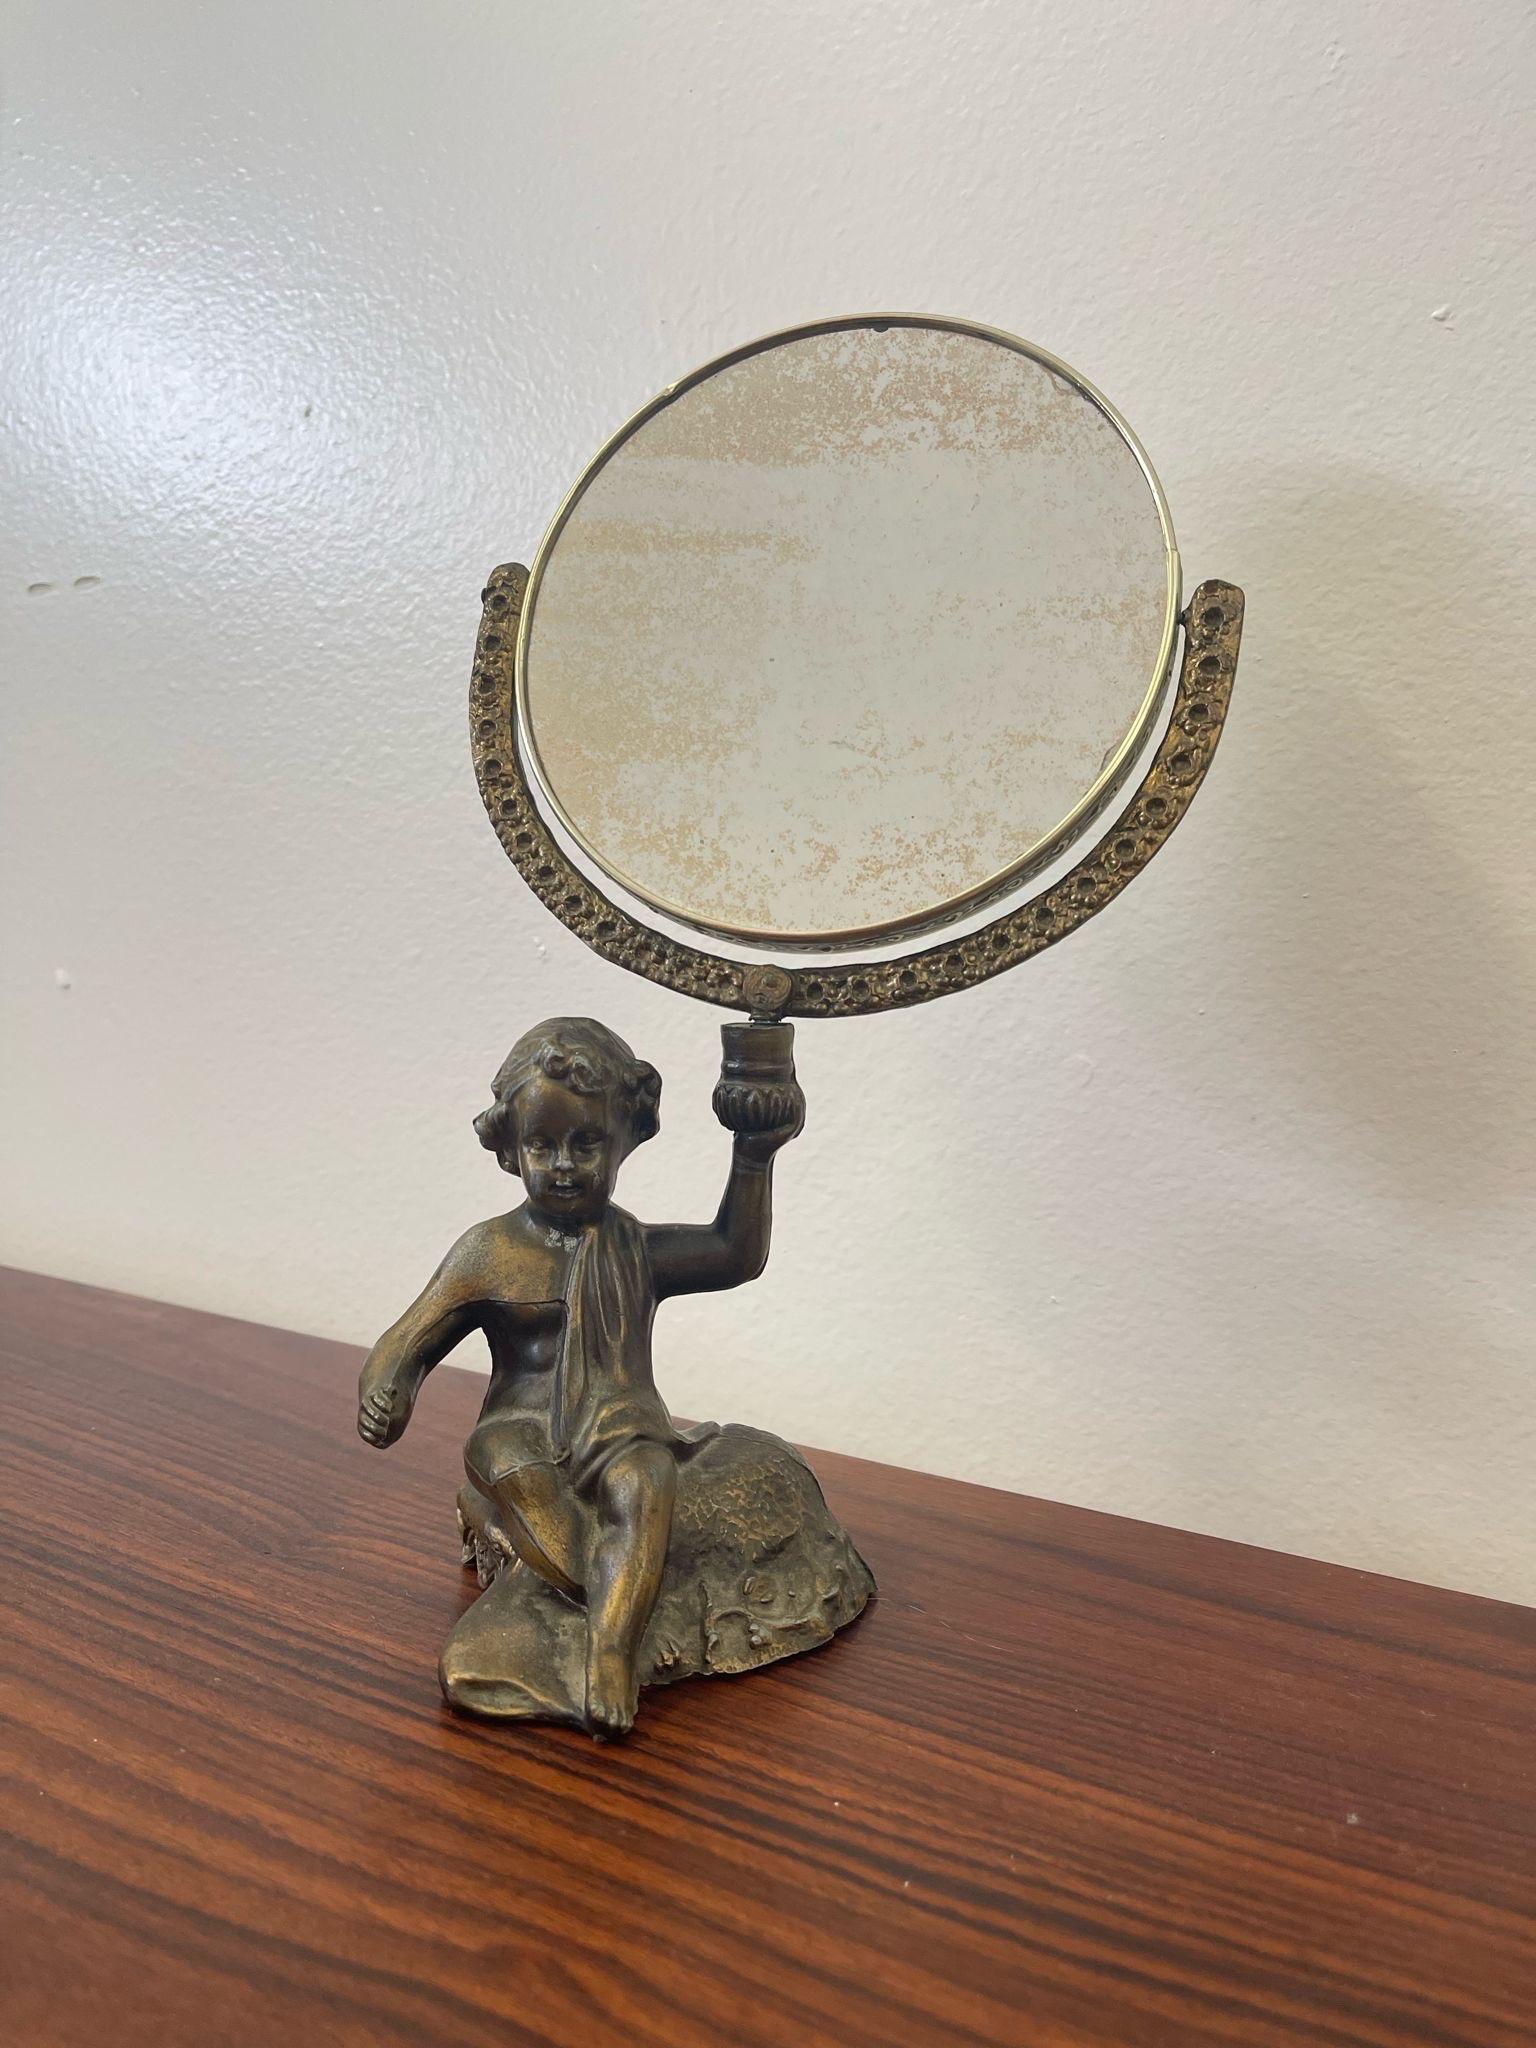 This mirror has intricate detailing throughout. The Cherub is shown holding the mirror up with his hand. Petina in the glass shows beautiful aging. Vintage Condition Consistent with Age as Pictured.

Dimensions. 7 W ; 4 D ; 12 H